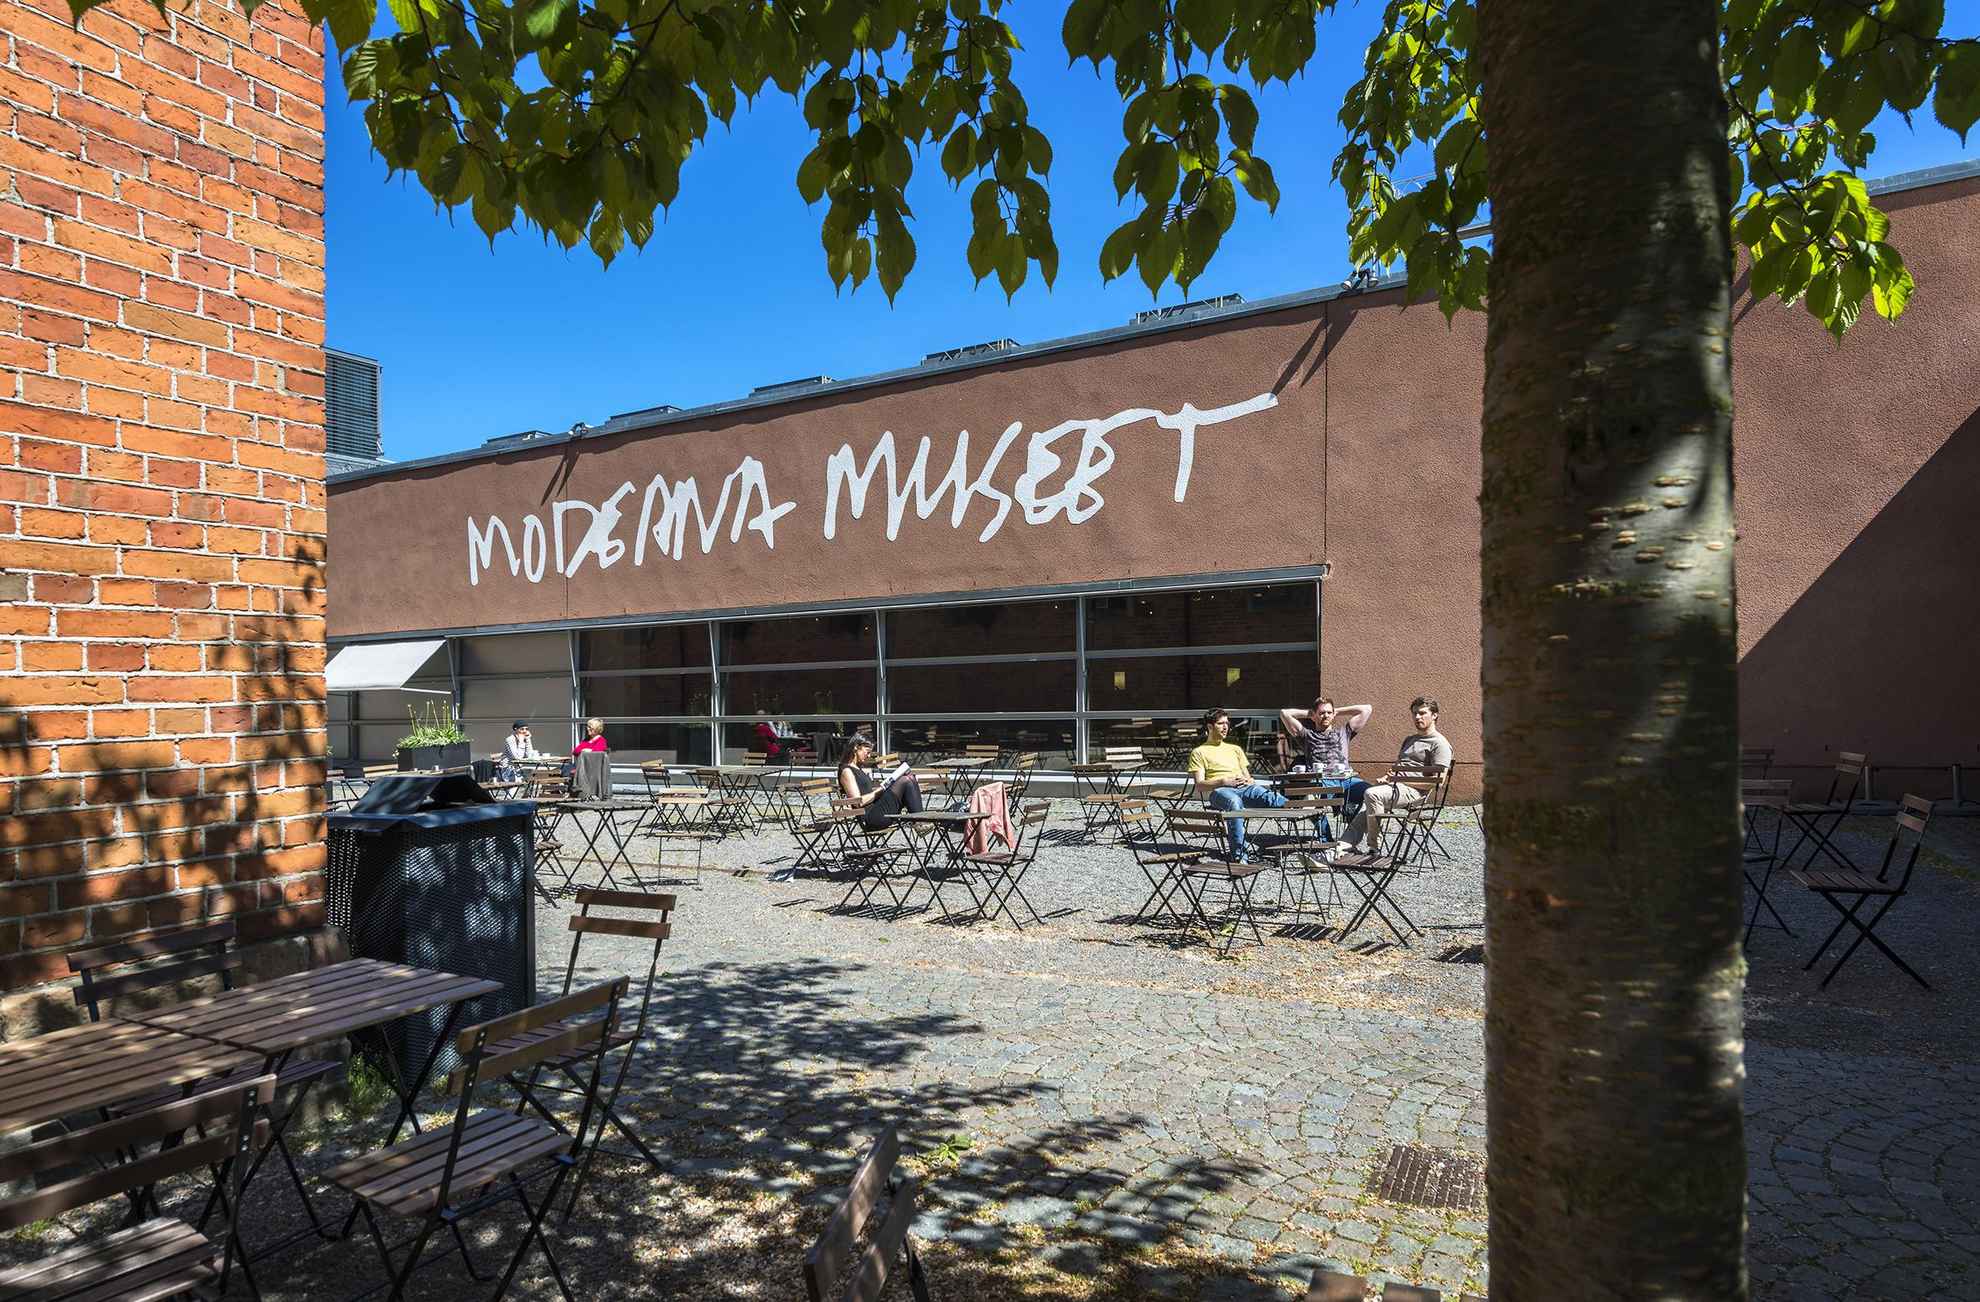 The enterence to Moderna Museet on a sunny day with people sitting on chairs outside.